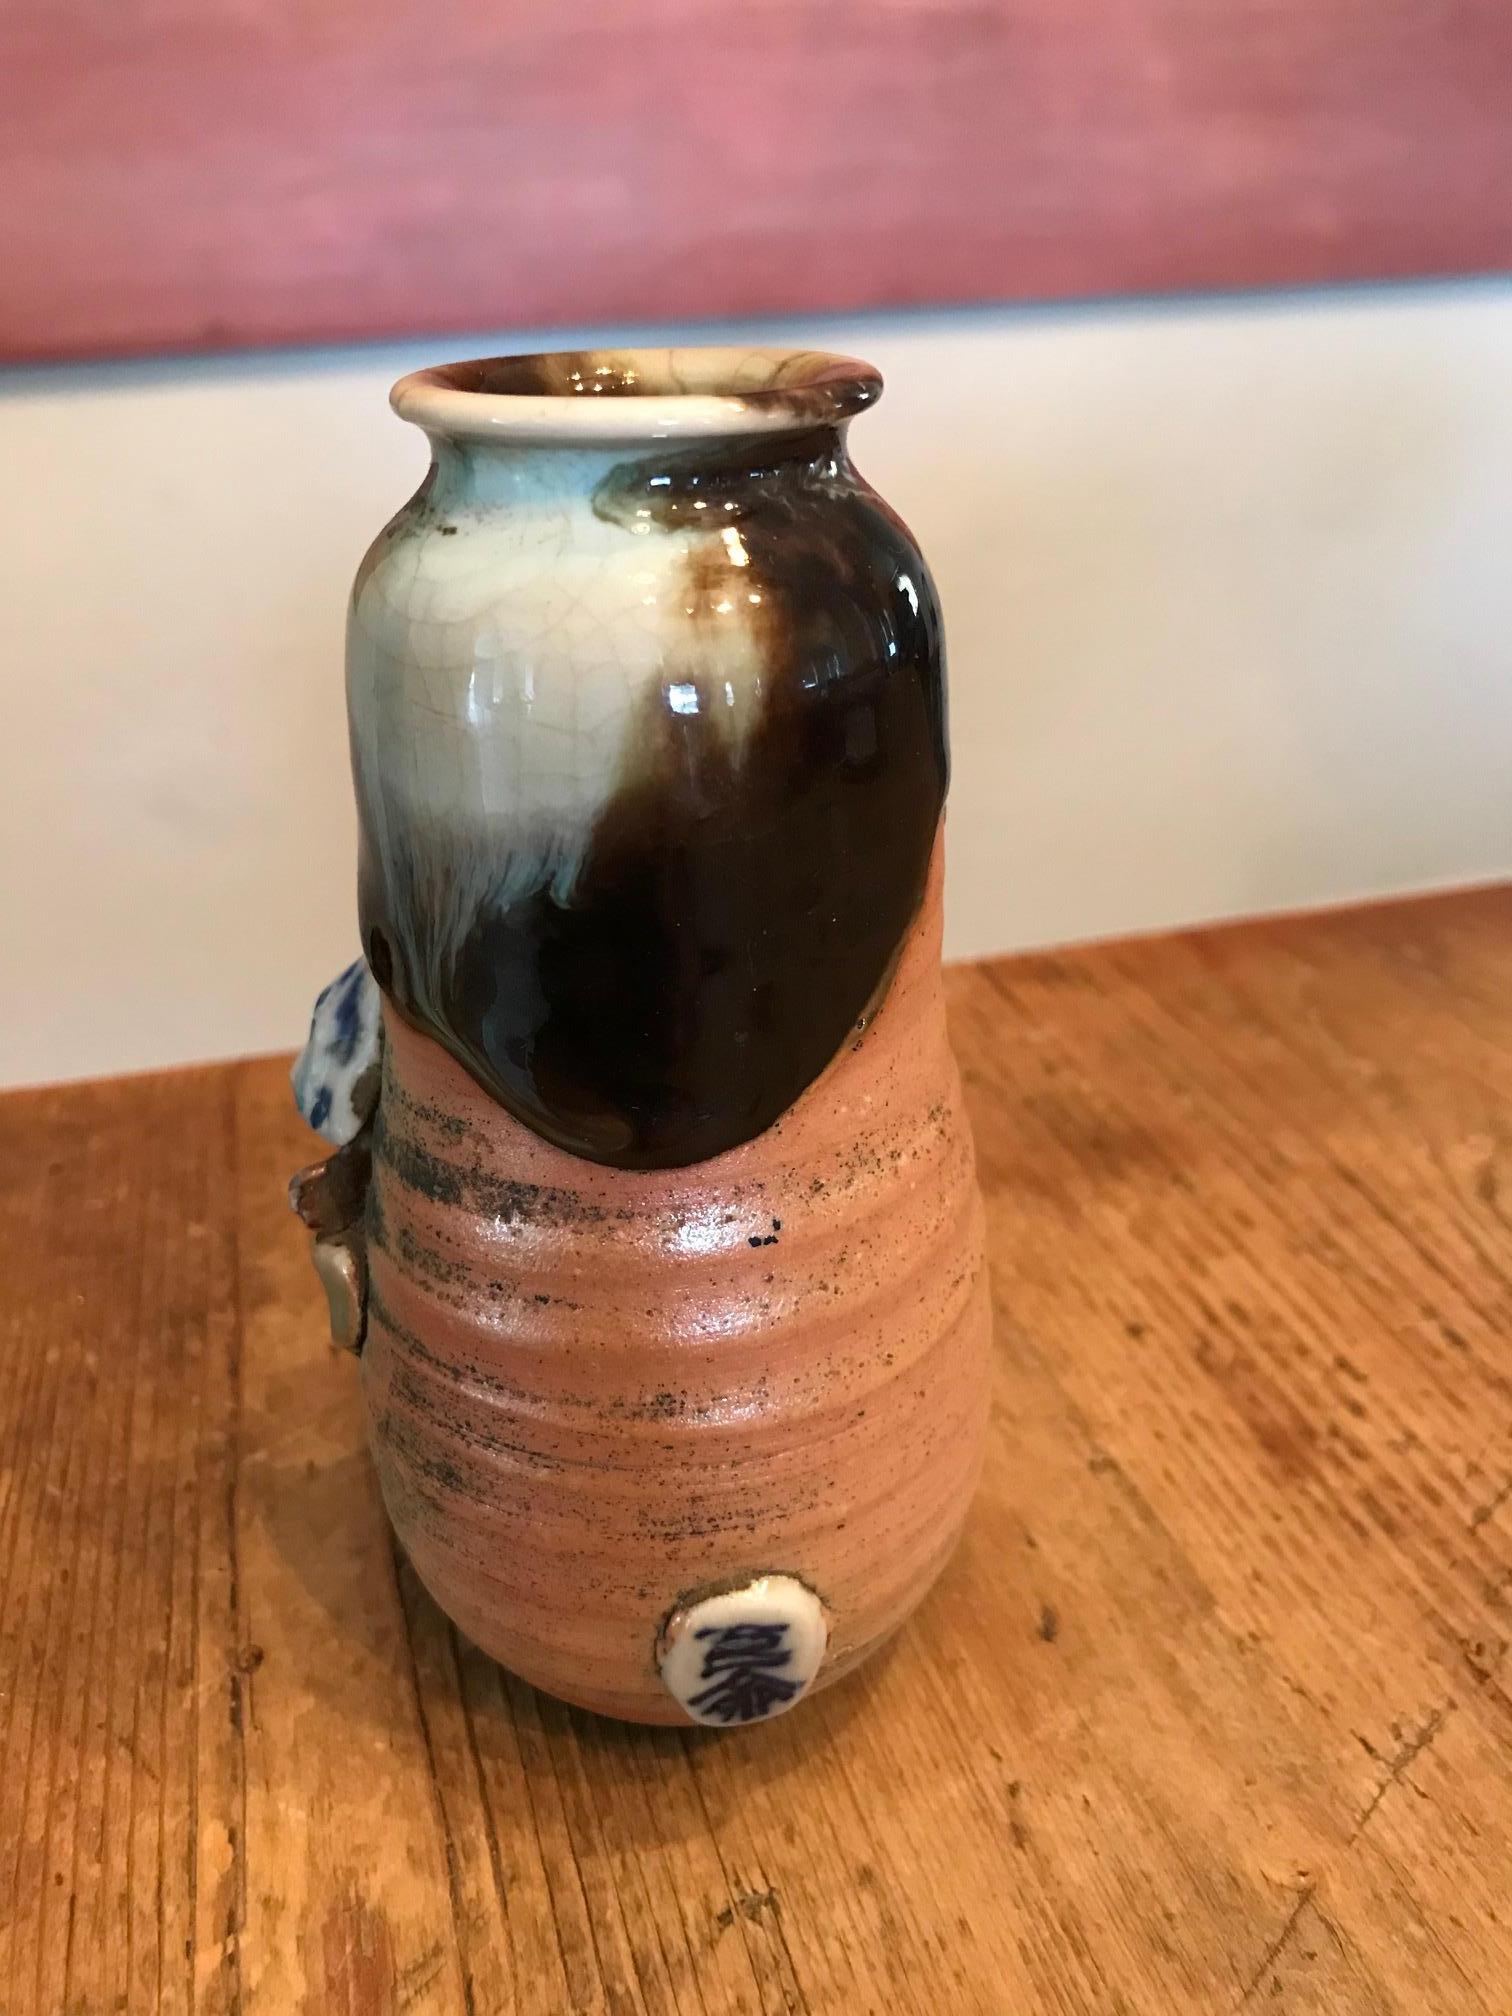 A fantastic Japanese Sumida Gawa vase, circa late 1800s-early 1900s.

This vase was likely made by renowned potter Inoue Ryosai

His signed mark is on the side.

Dimensions: 5